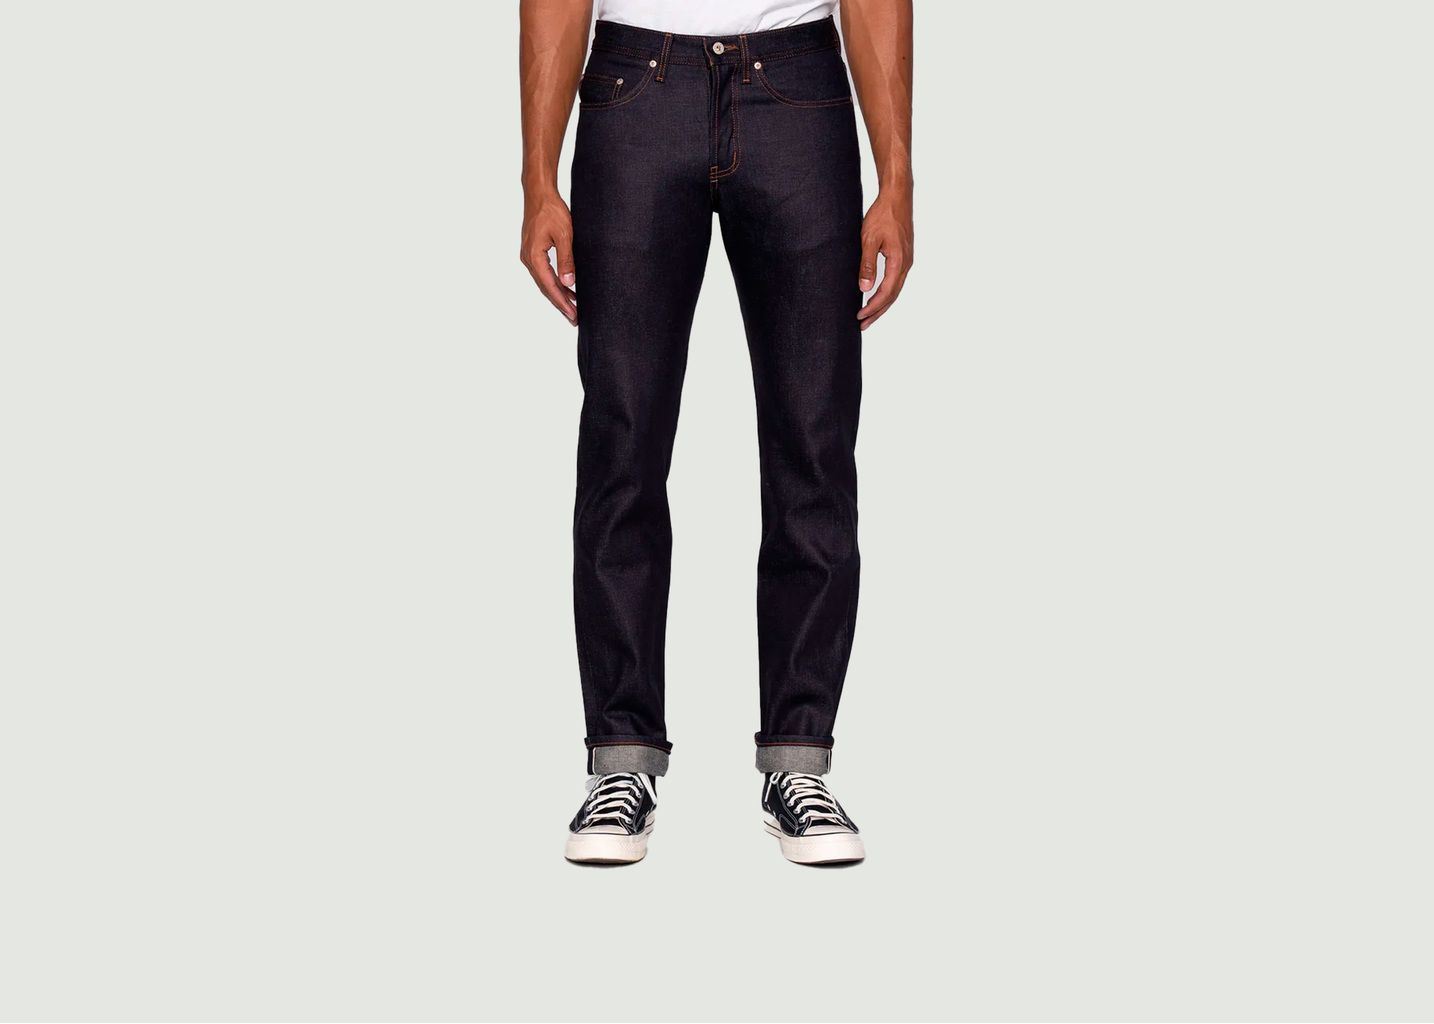 Jeans Weird Guy Sea Island Cotton Selvedge - Naked and Famous